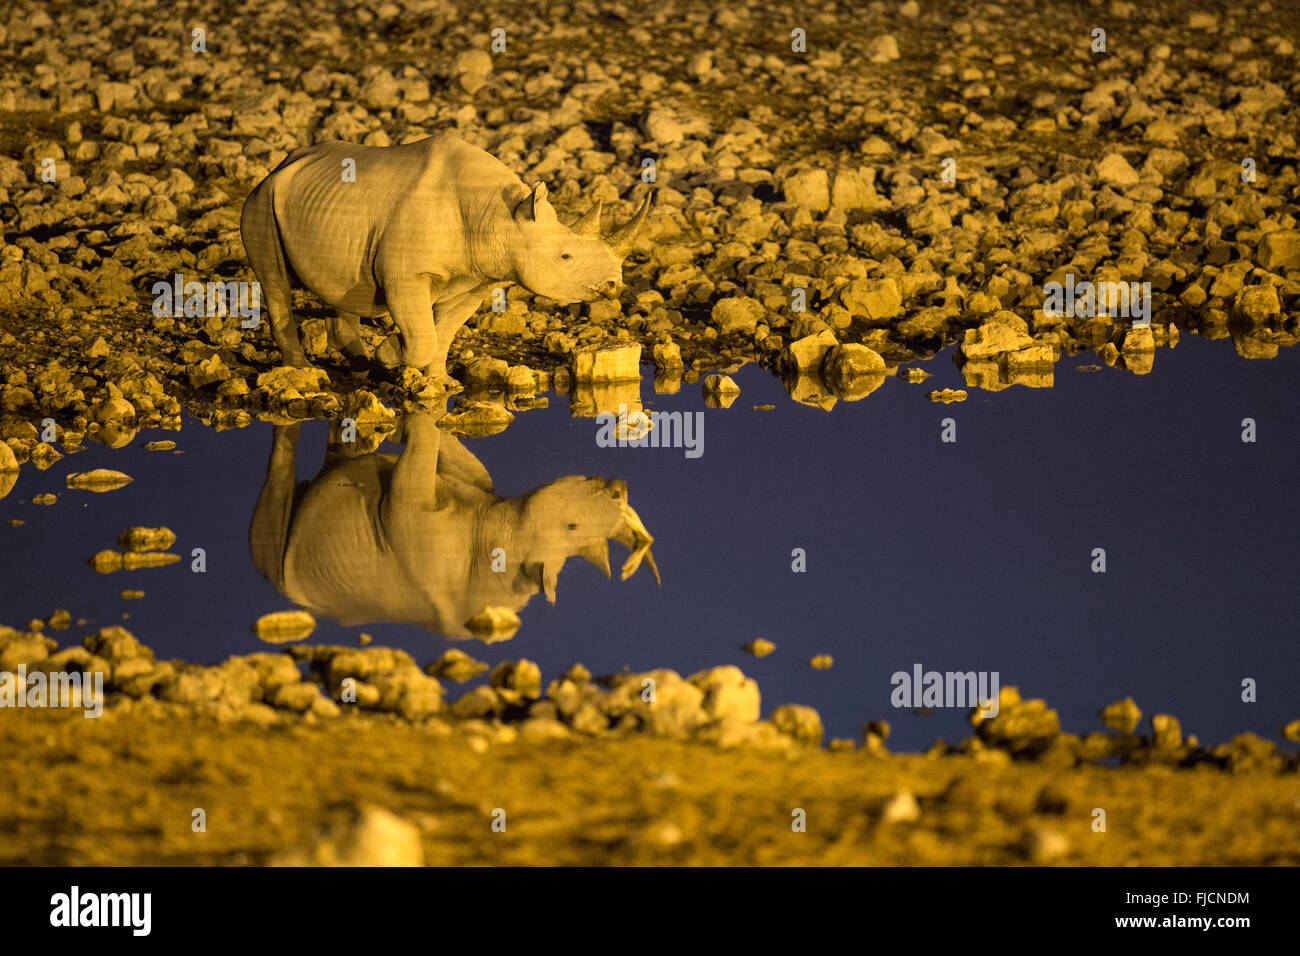 Rhino drinks at a flood lit water hole Stock Photo